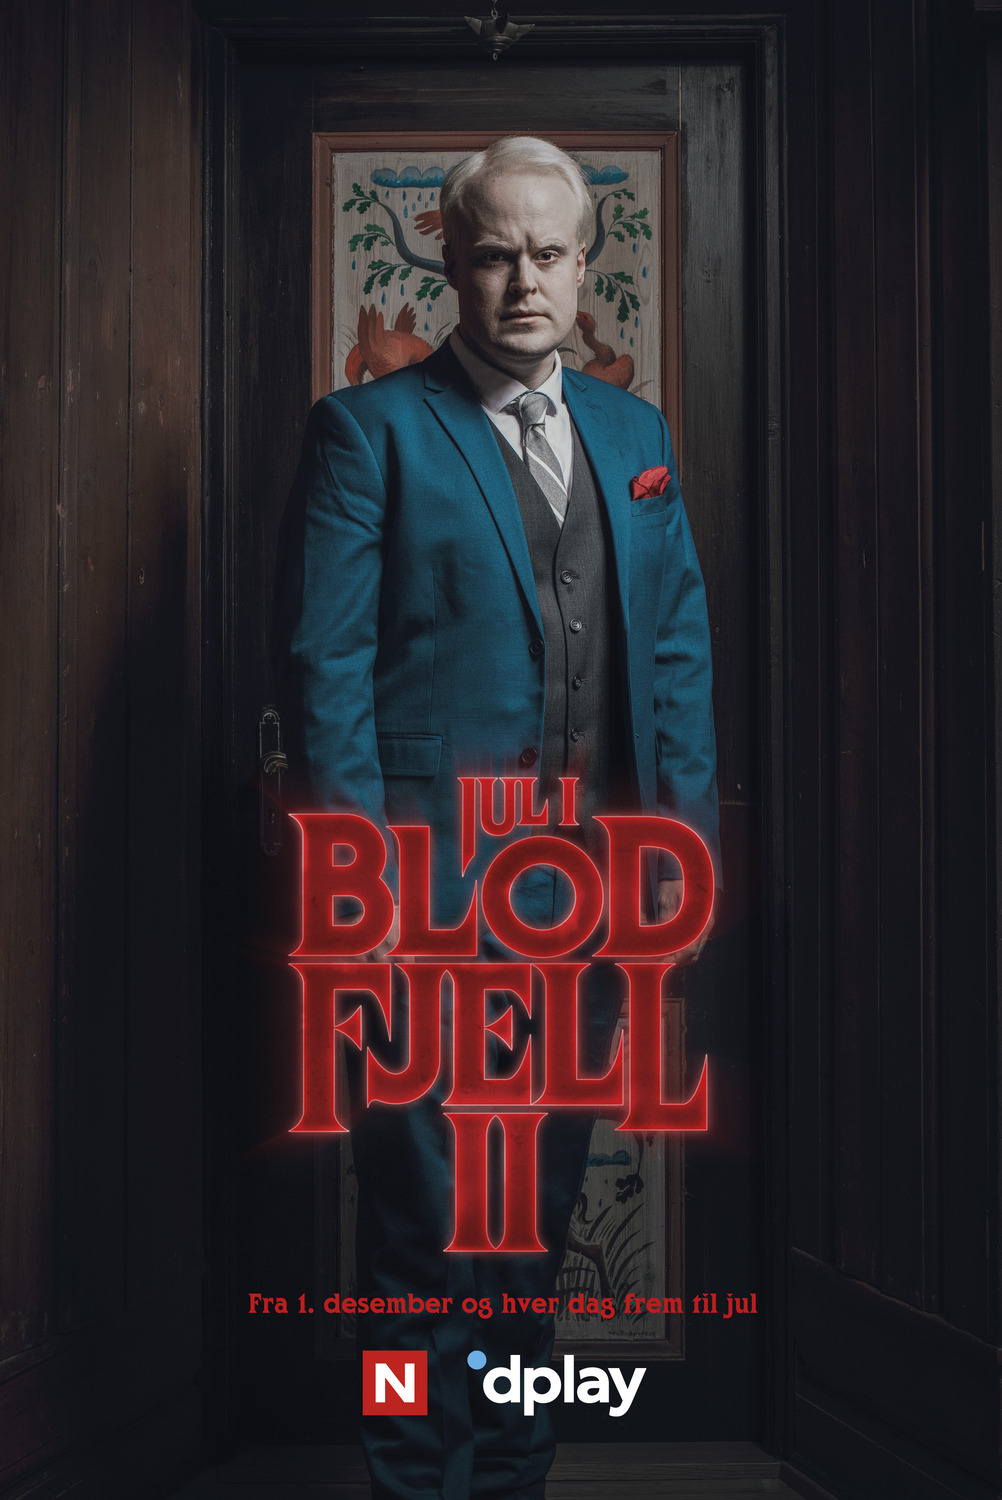 Extra Large TV Poster Image for Jul i Blodfjell (#11 of 11)